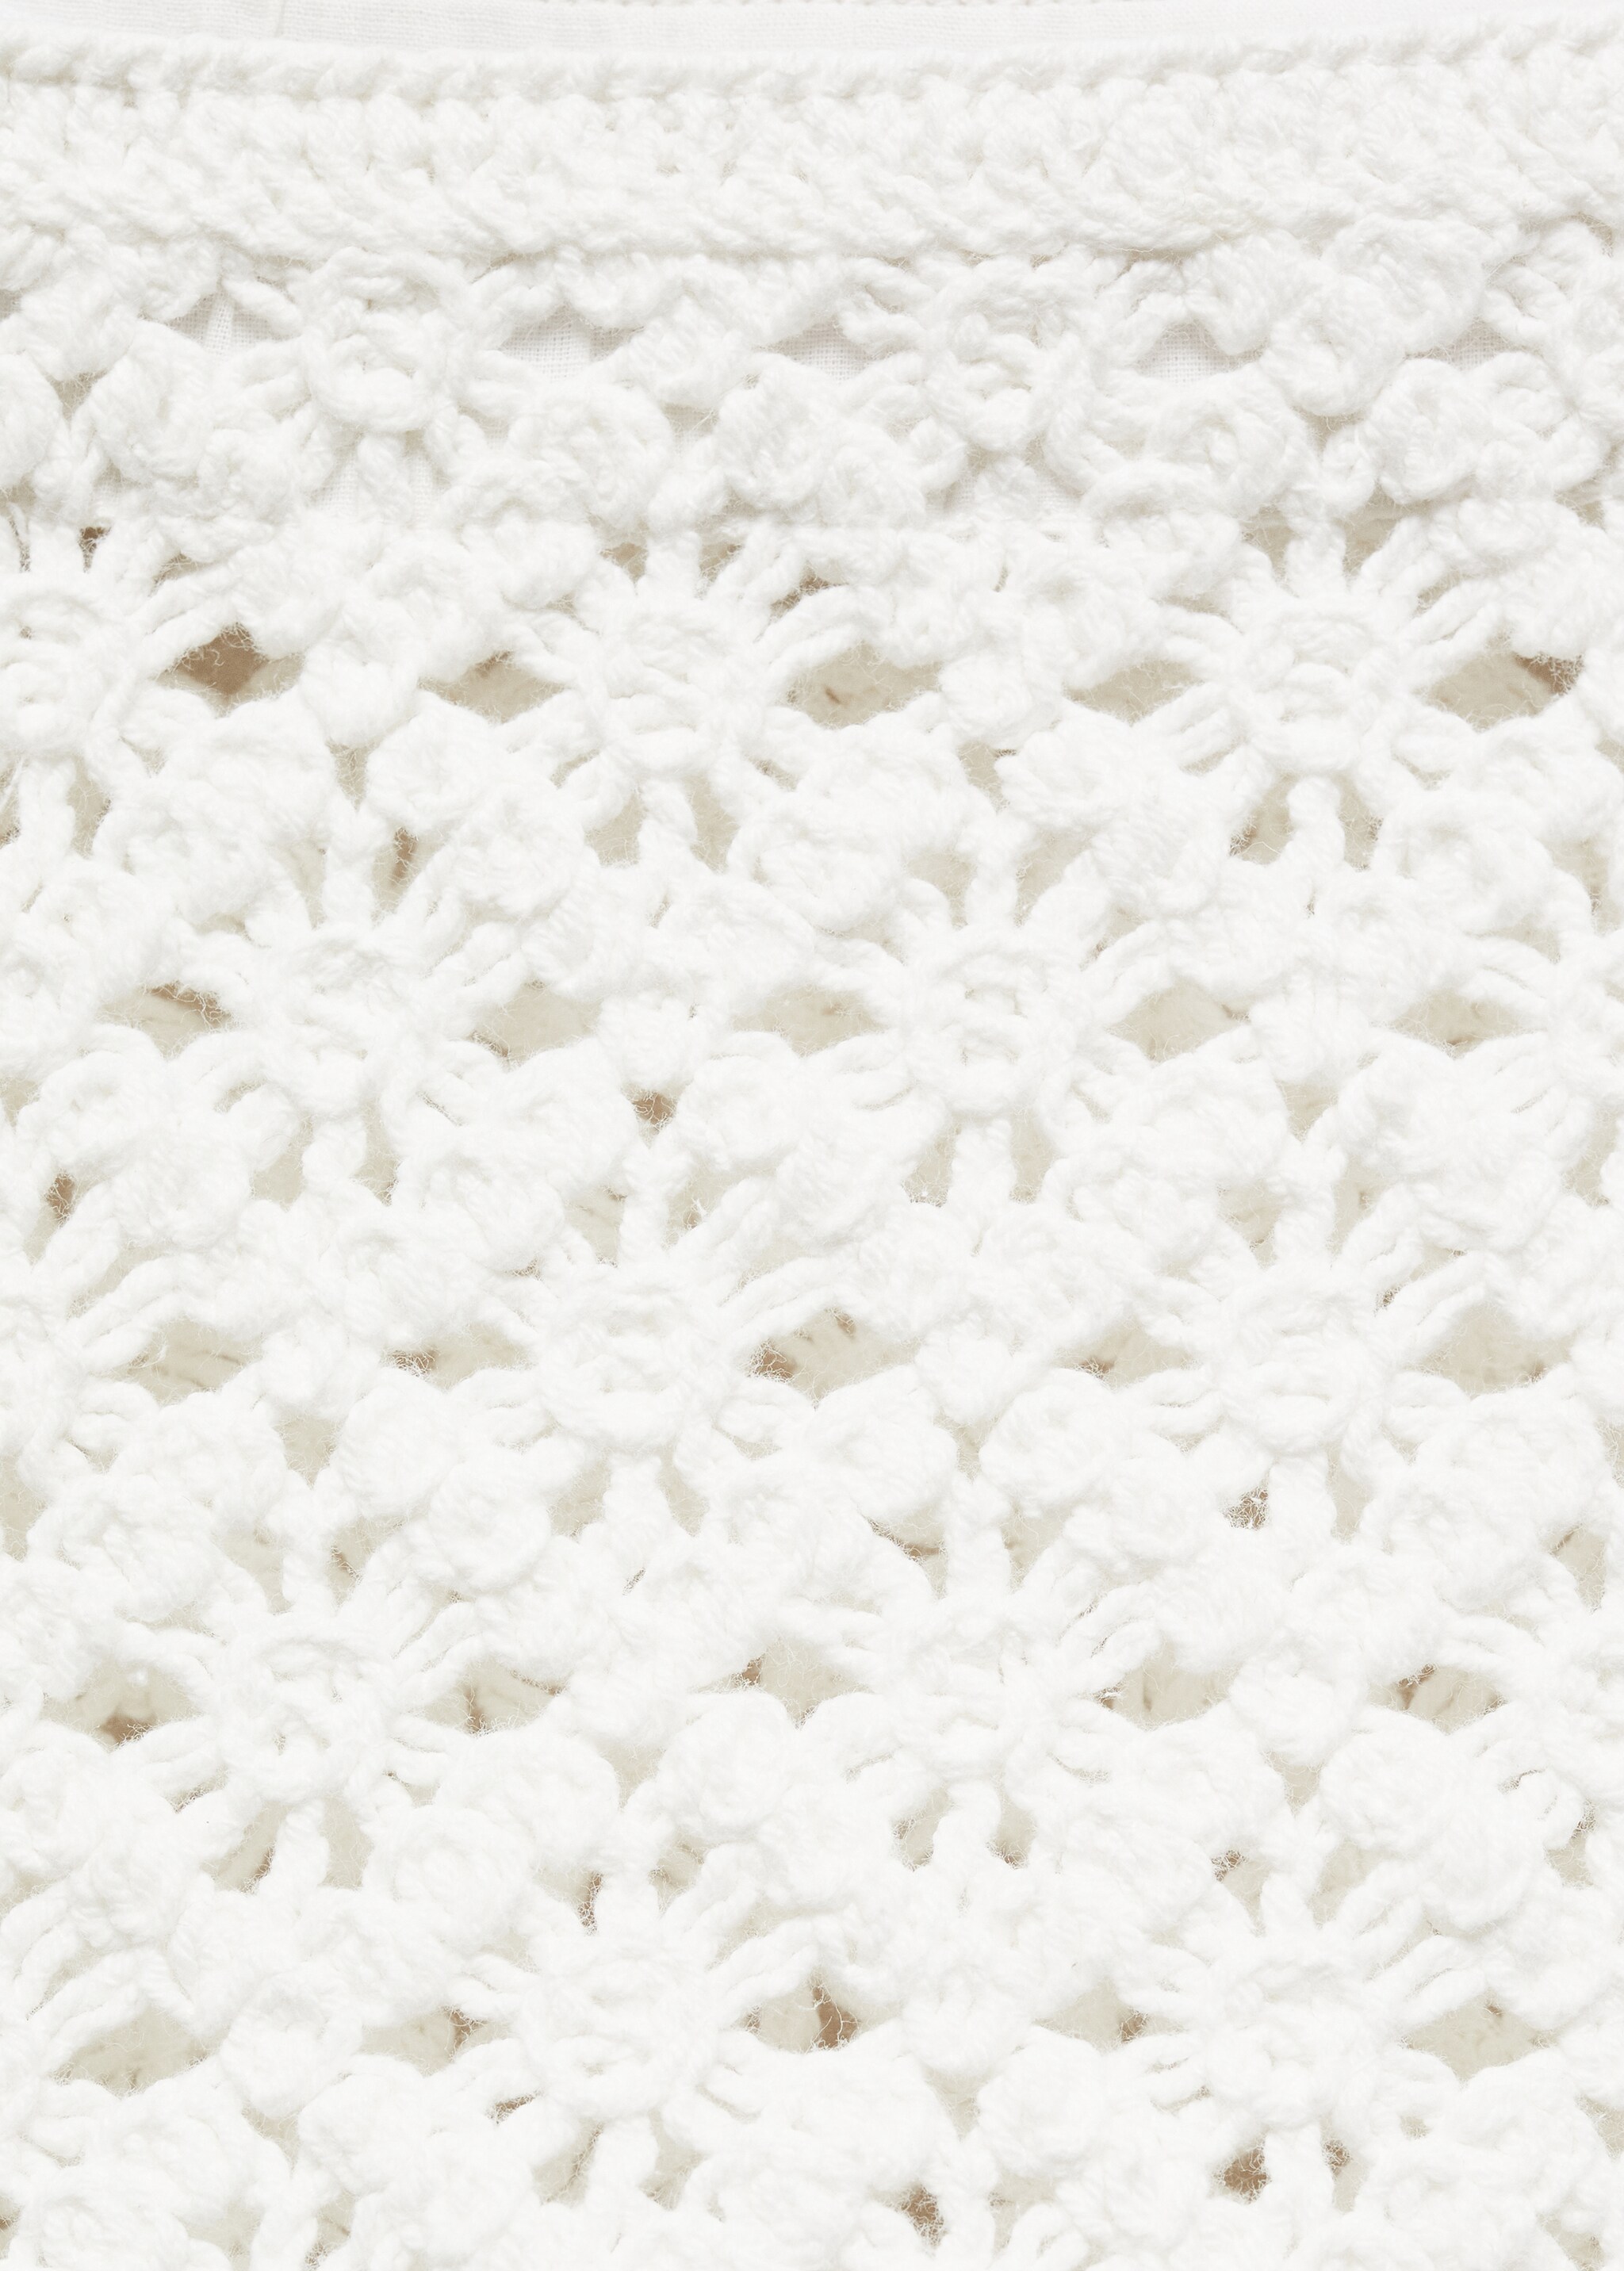 Crochet shorts - Details of the article 8